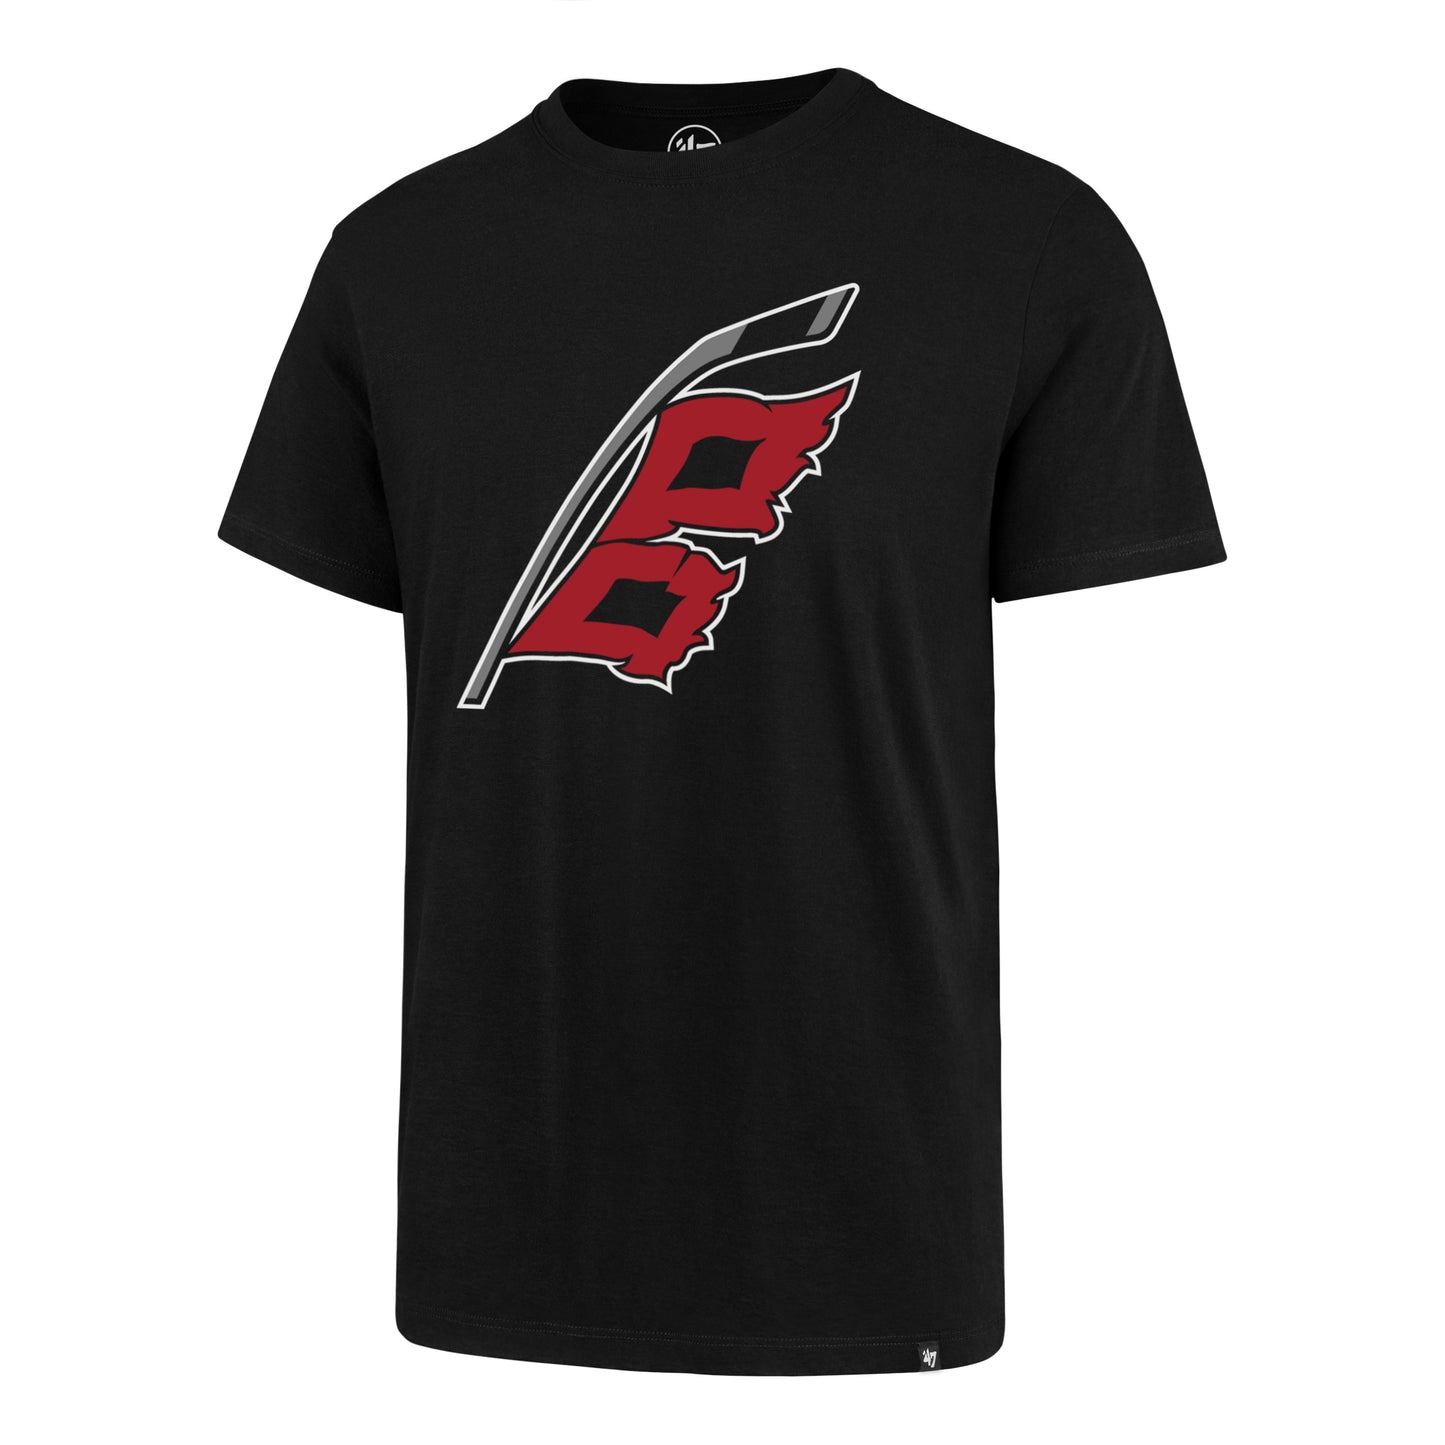 Front: Black tee with Hurricanes flag logo on chest and 47 tag logo on hem